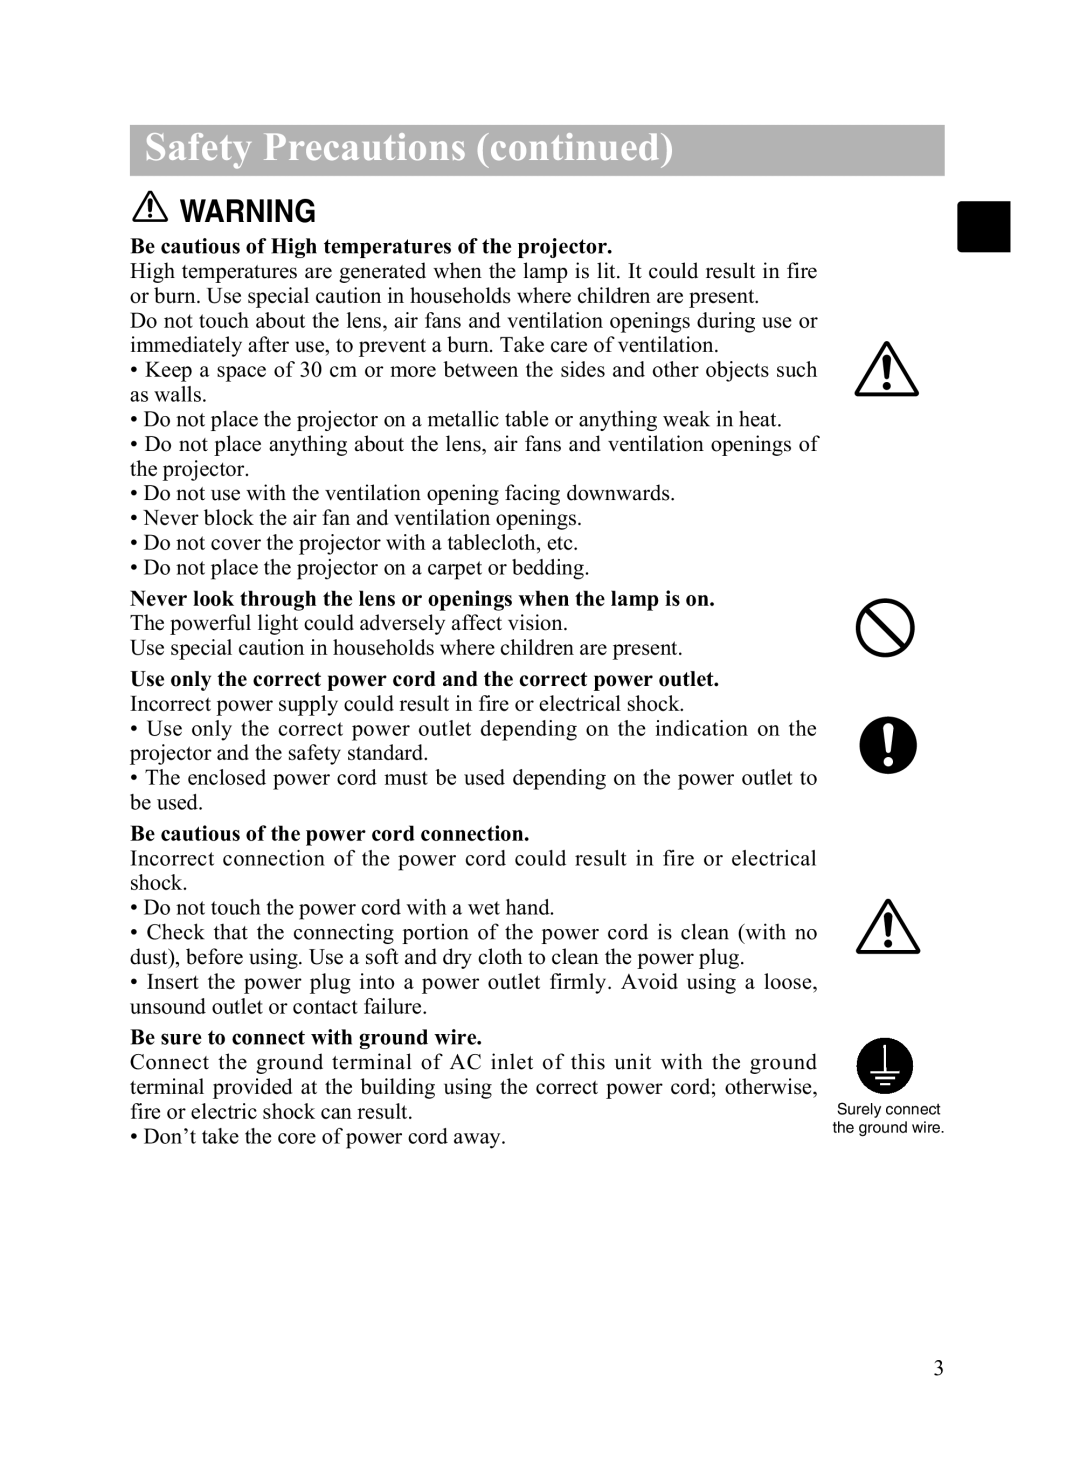 Dukane 8055 user manual Safety Precautions continued, Be cautious of High temperatures of the projector 